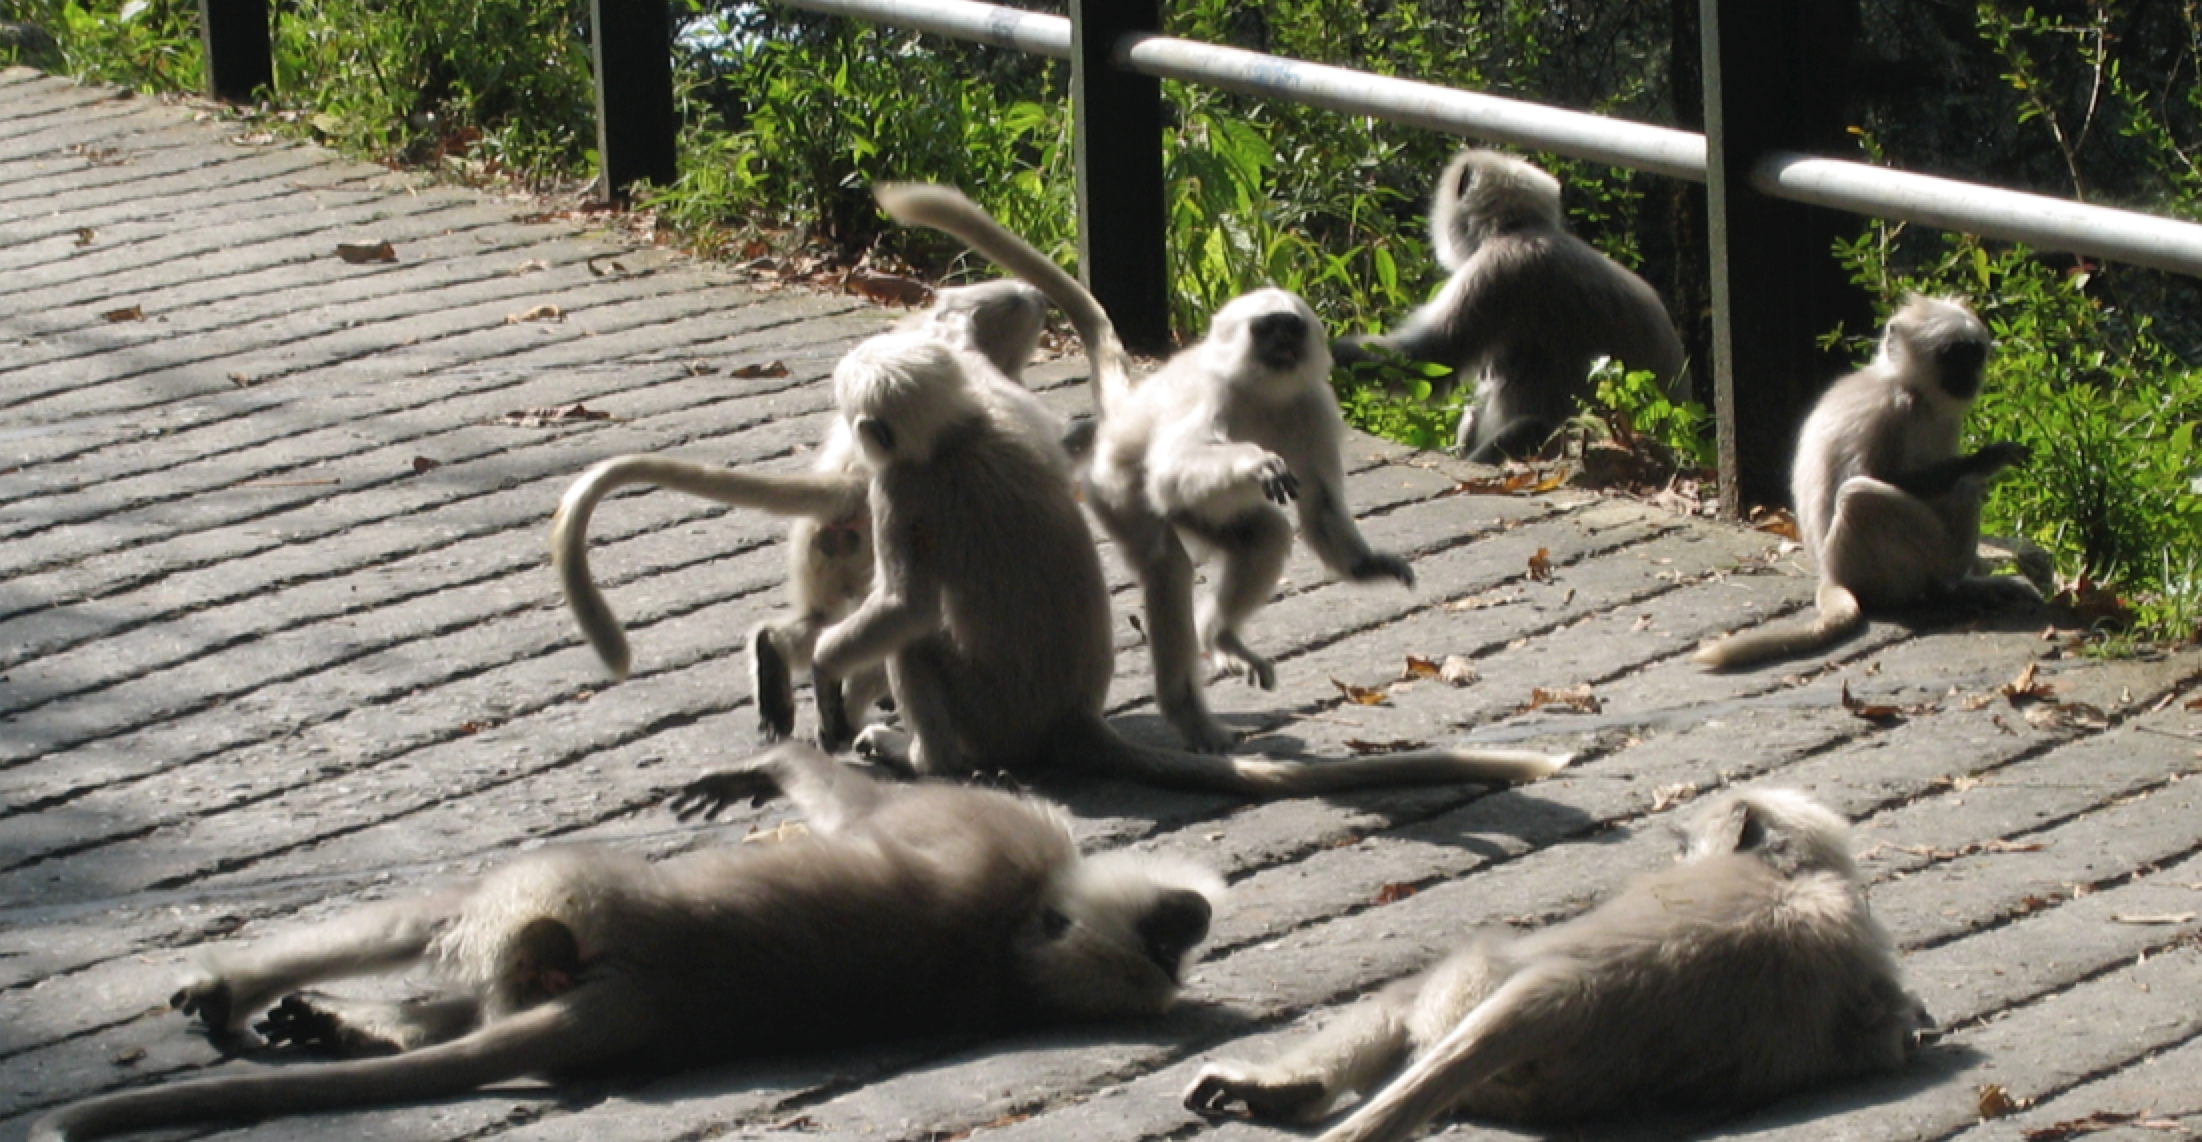  Langur monkeys playing. Mussoorie, India. Photo by Marianne Maeckelbergh. 